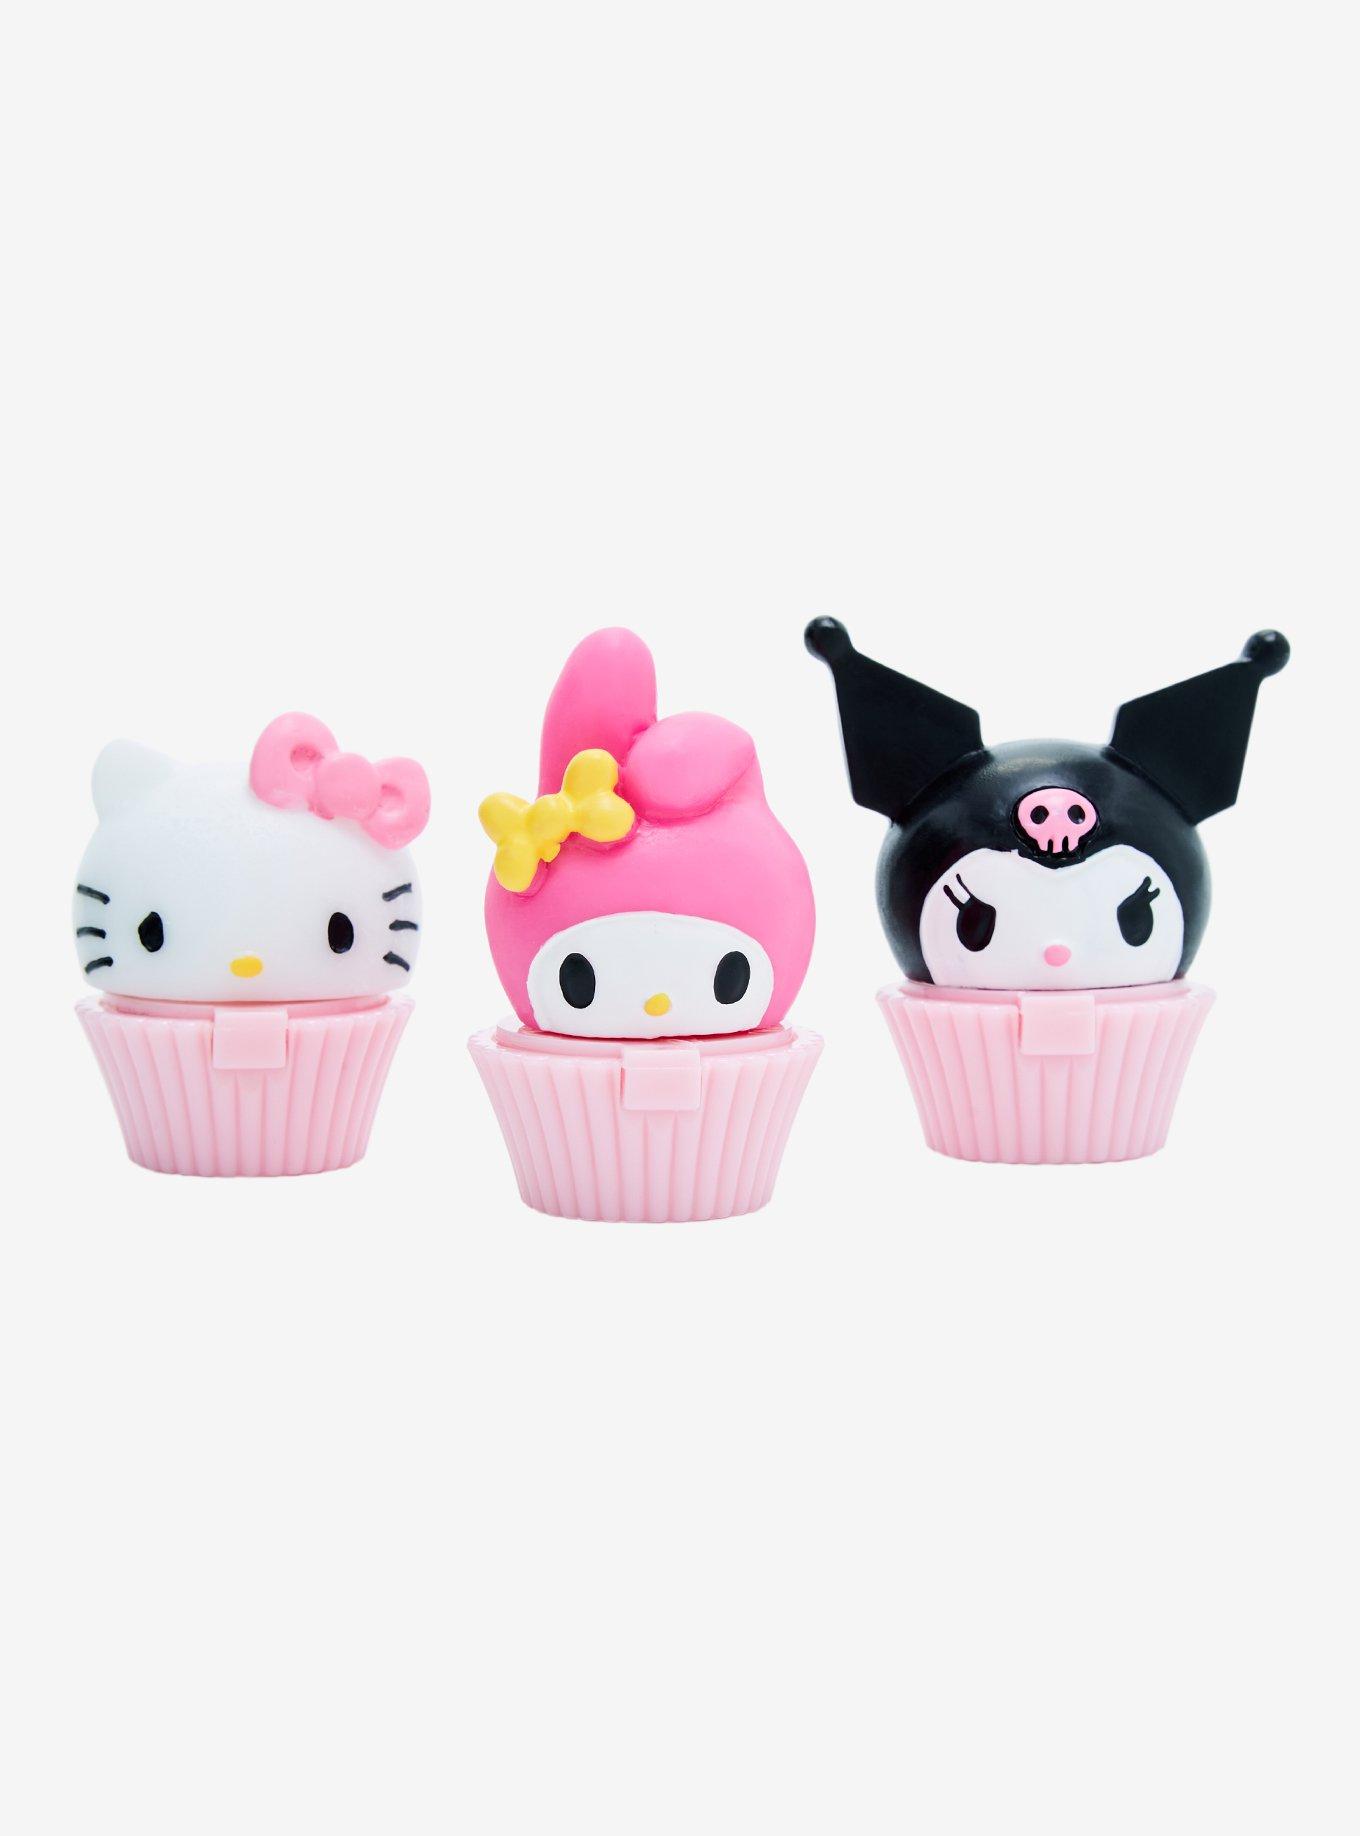 Hello Kitty® and Mimmy Cupcake Rings — Every Baking Moment